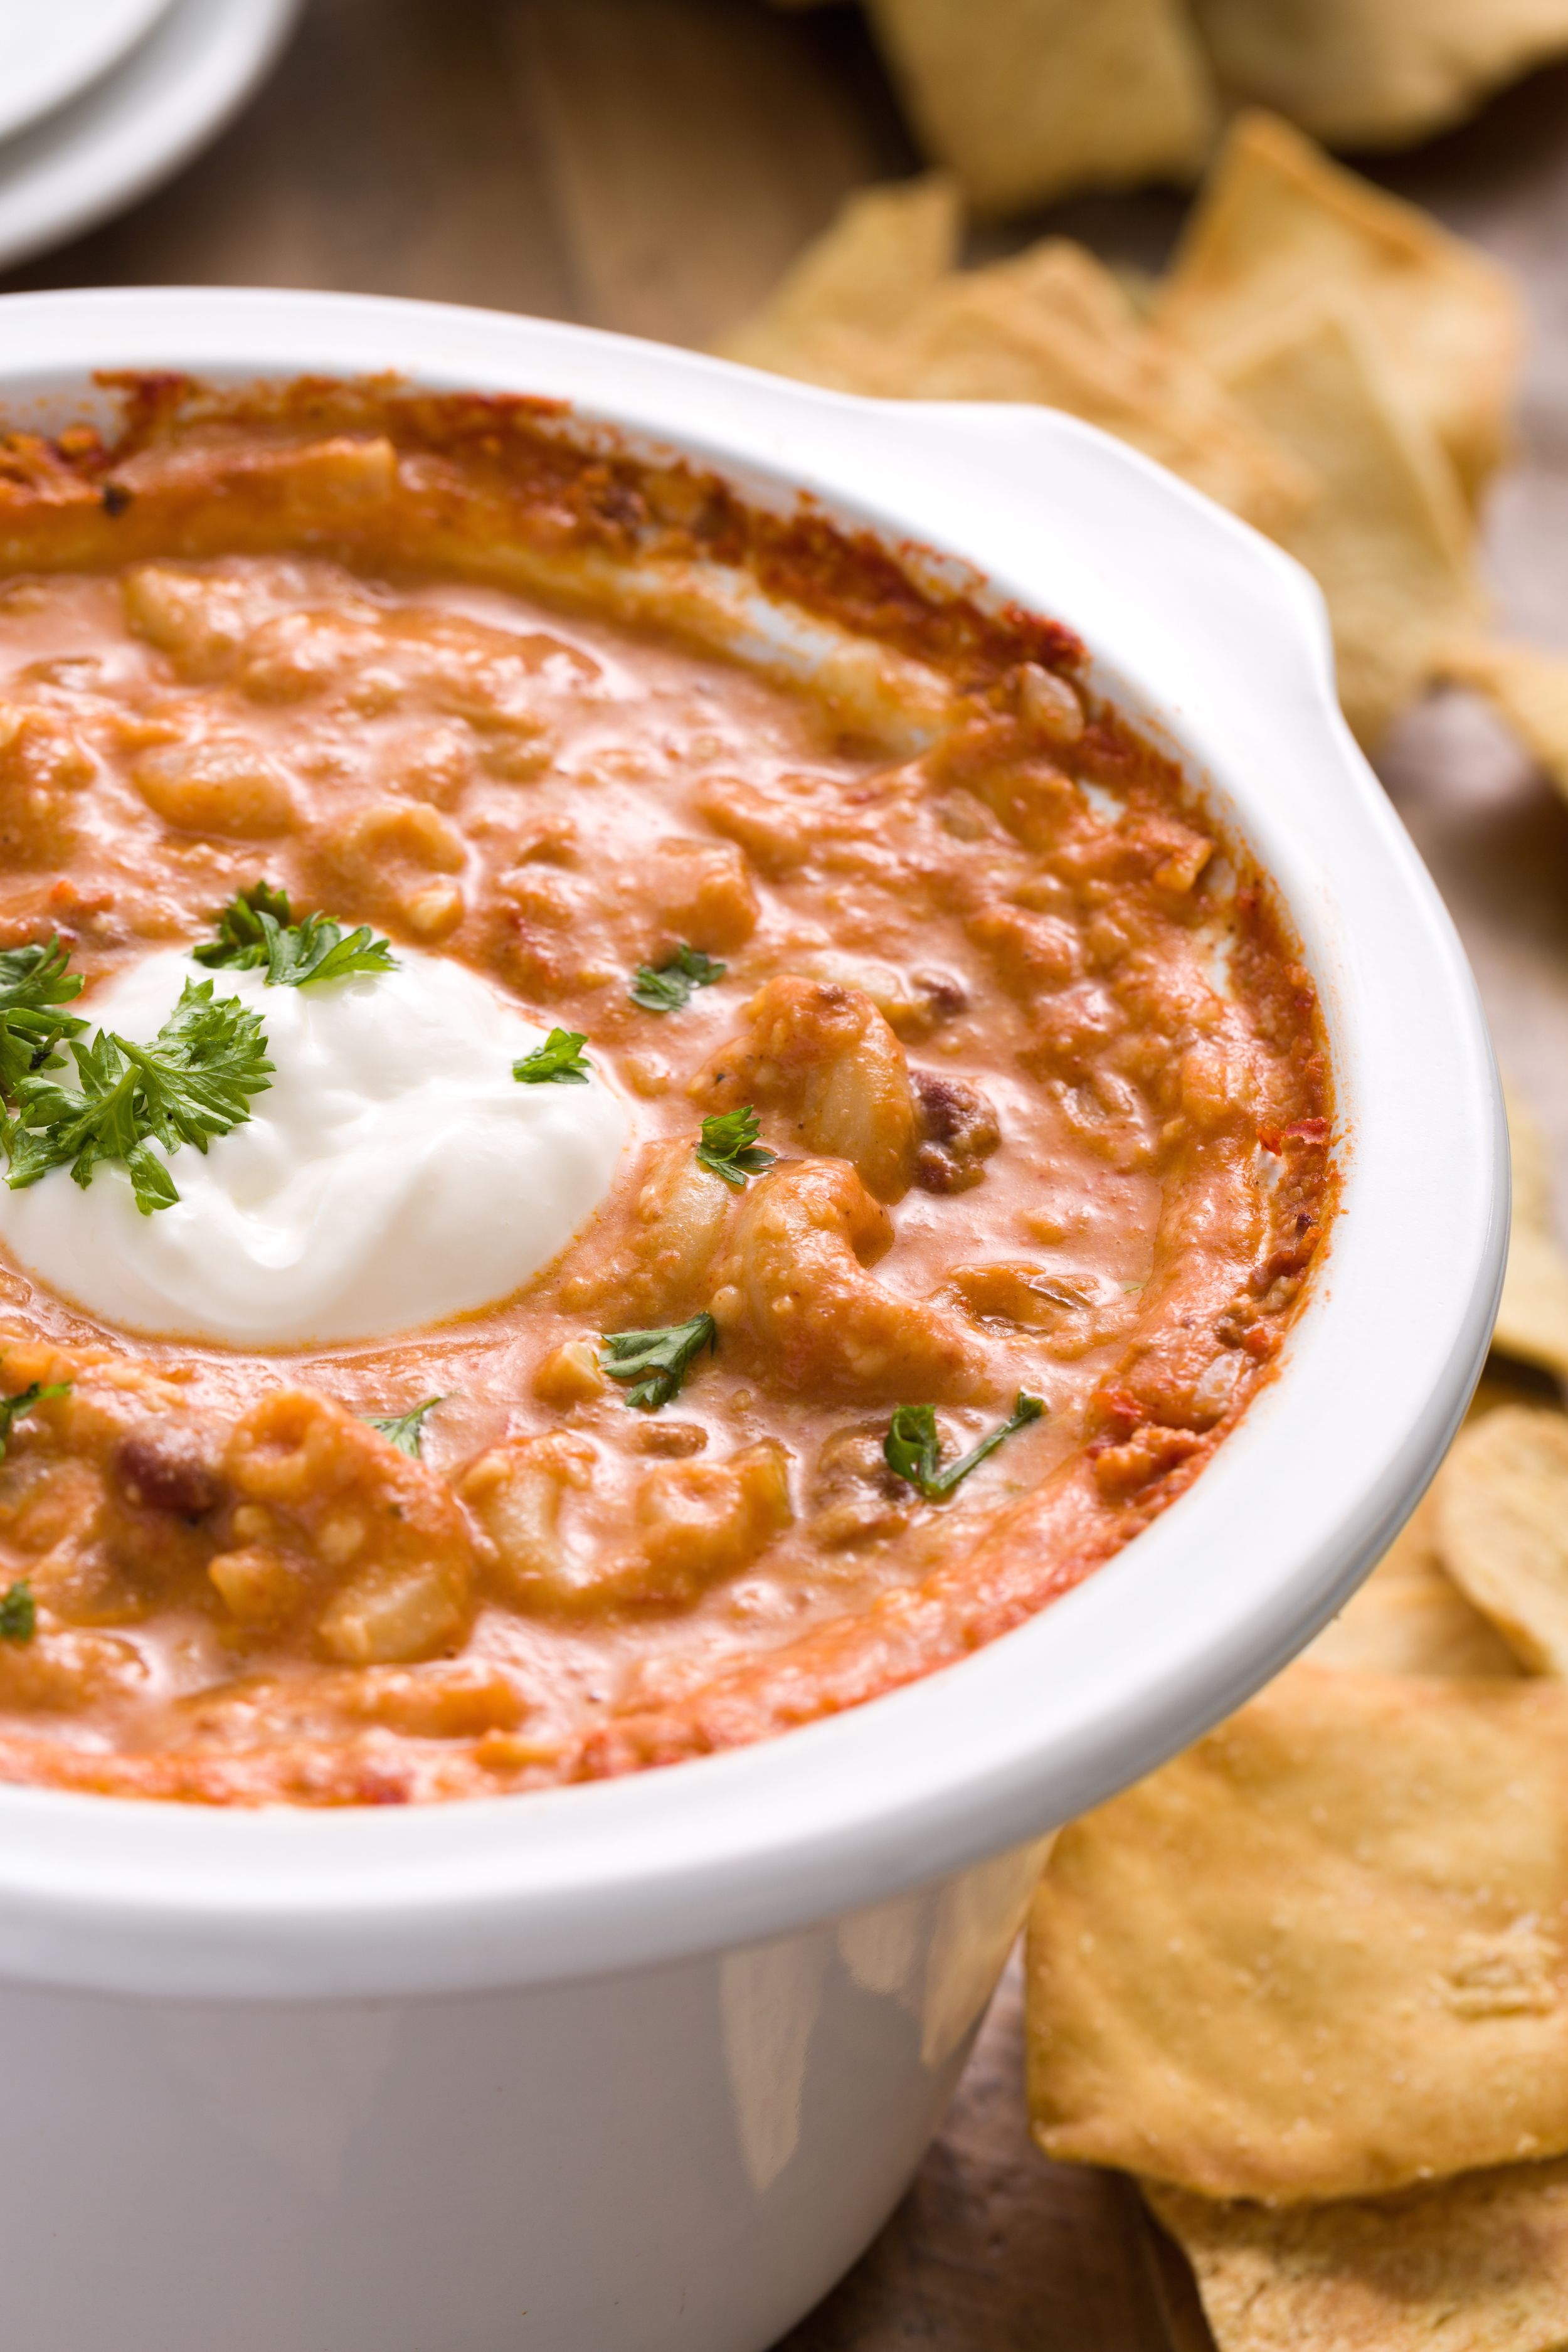 5-Ingredient Slow Cooker Chili Cheese Dip - Gal on a Mission